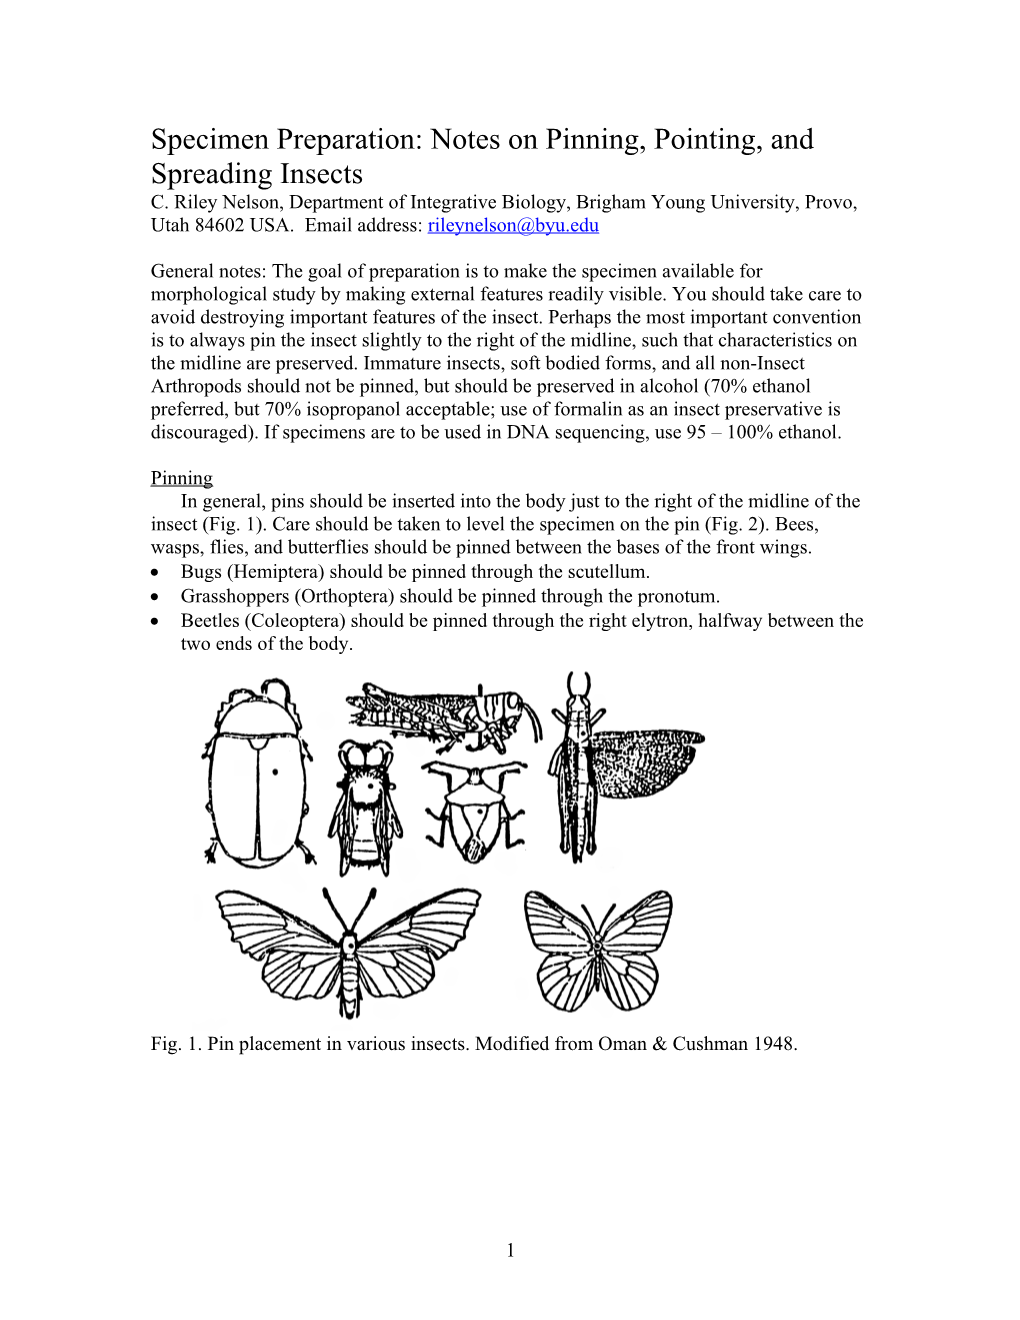 Specimen Preparation: Notes on Pinning, Pointing, and Spreading Insects